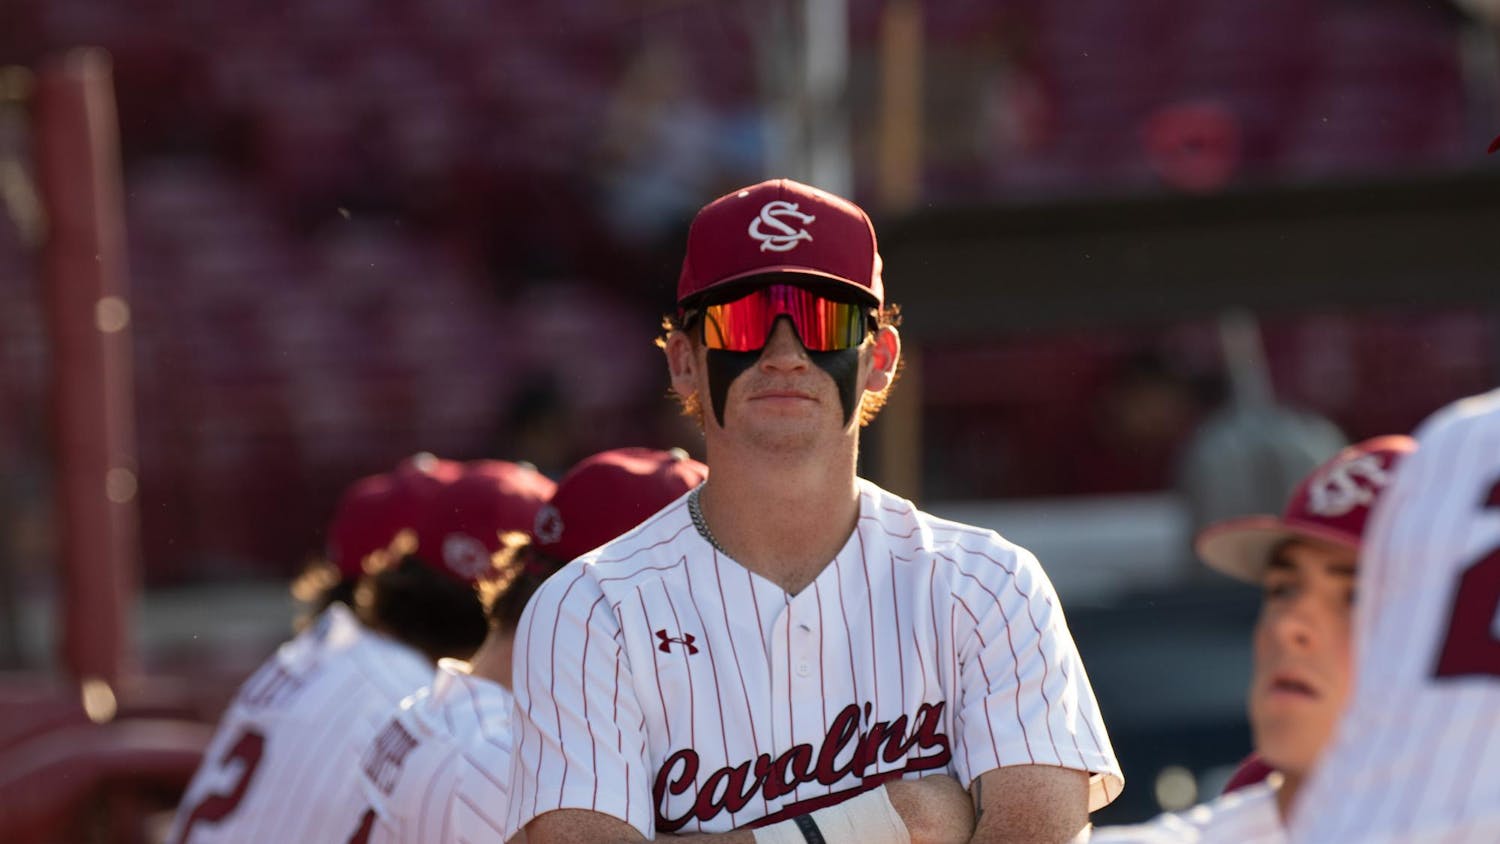 Senior catcher Dalton Reeves poses in the dugout before South Carolina's matchup against Arkansas on April 19, 2024, at Founders Park. Reeves saw three at-bats as the Gamecocks' designated hitter and was struck out twice by the Razorbacks.